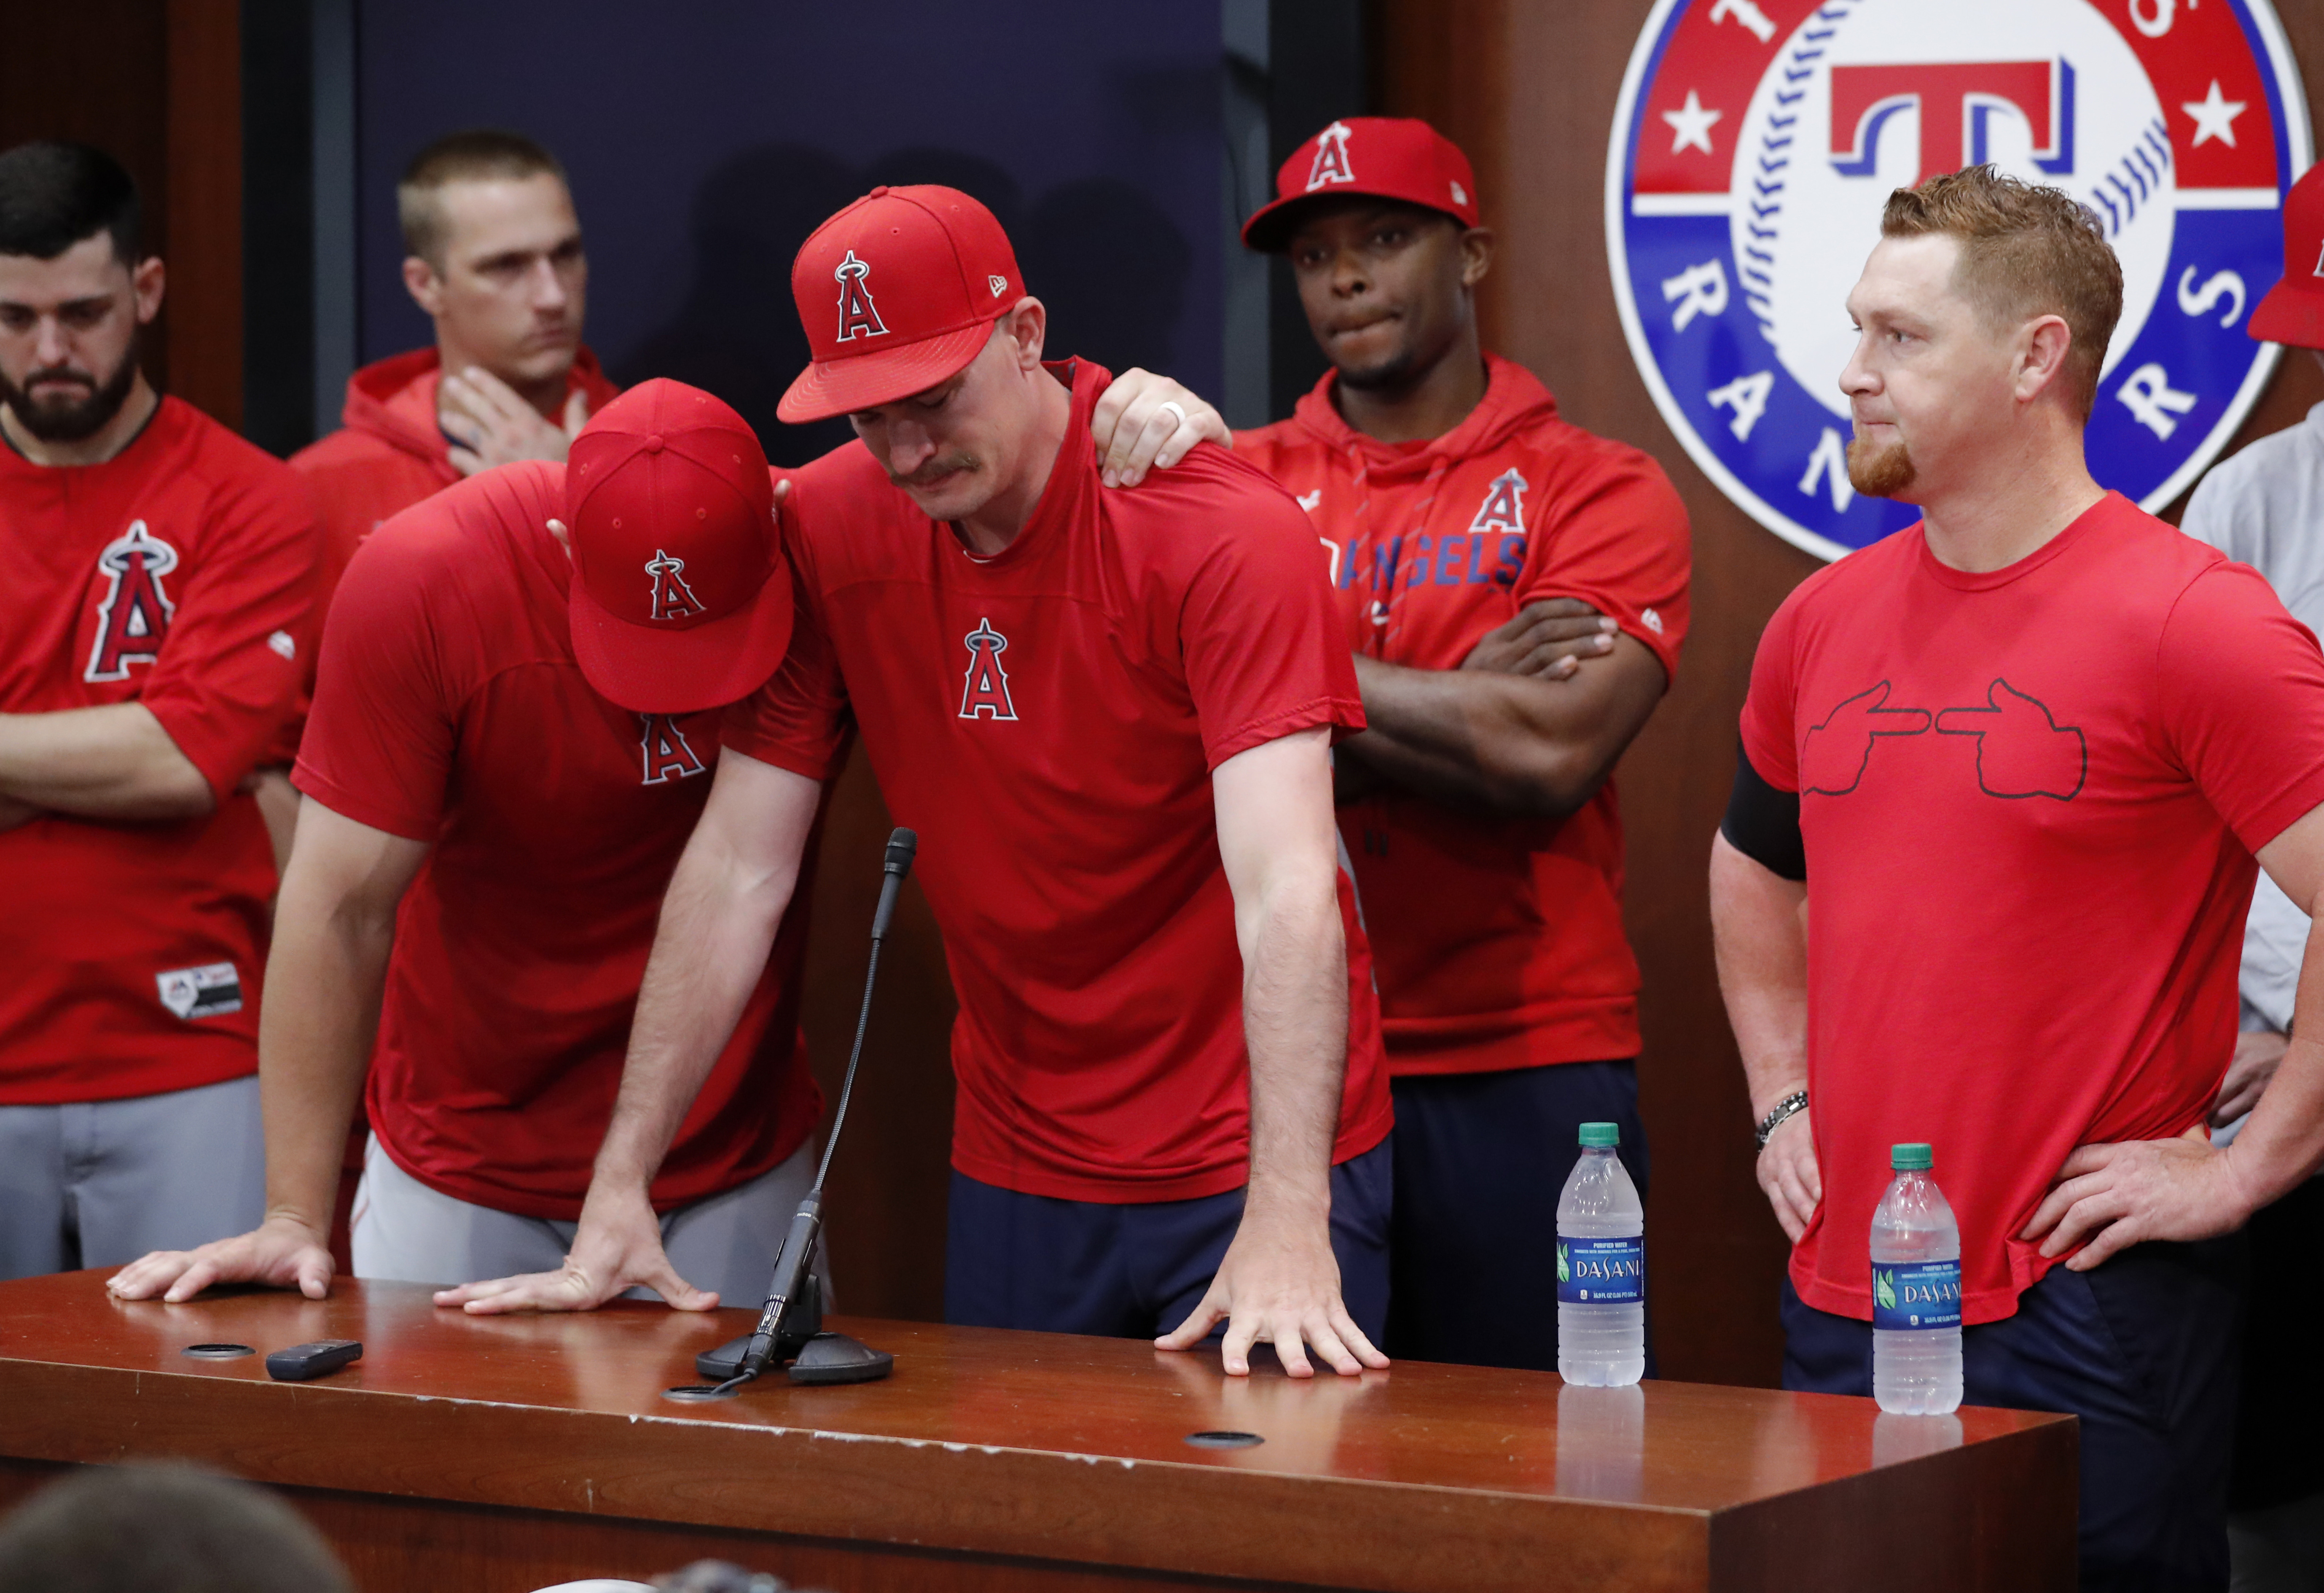 Angels-Rangers DH set for makeup of game when Skaggs died